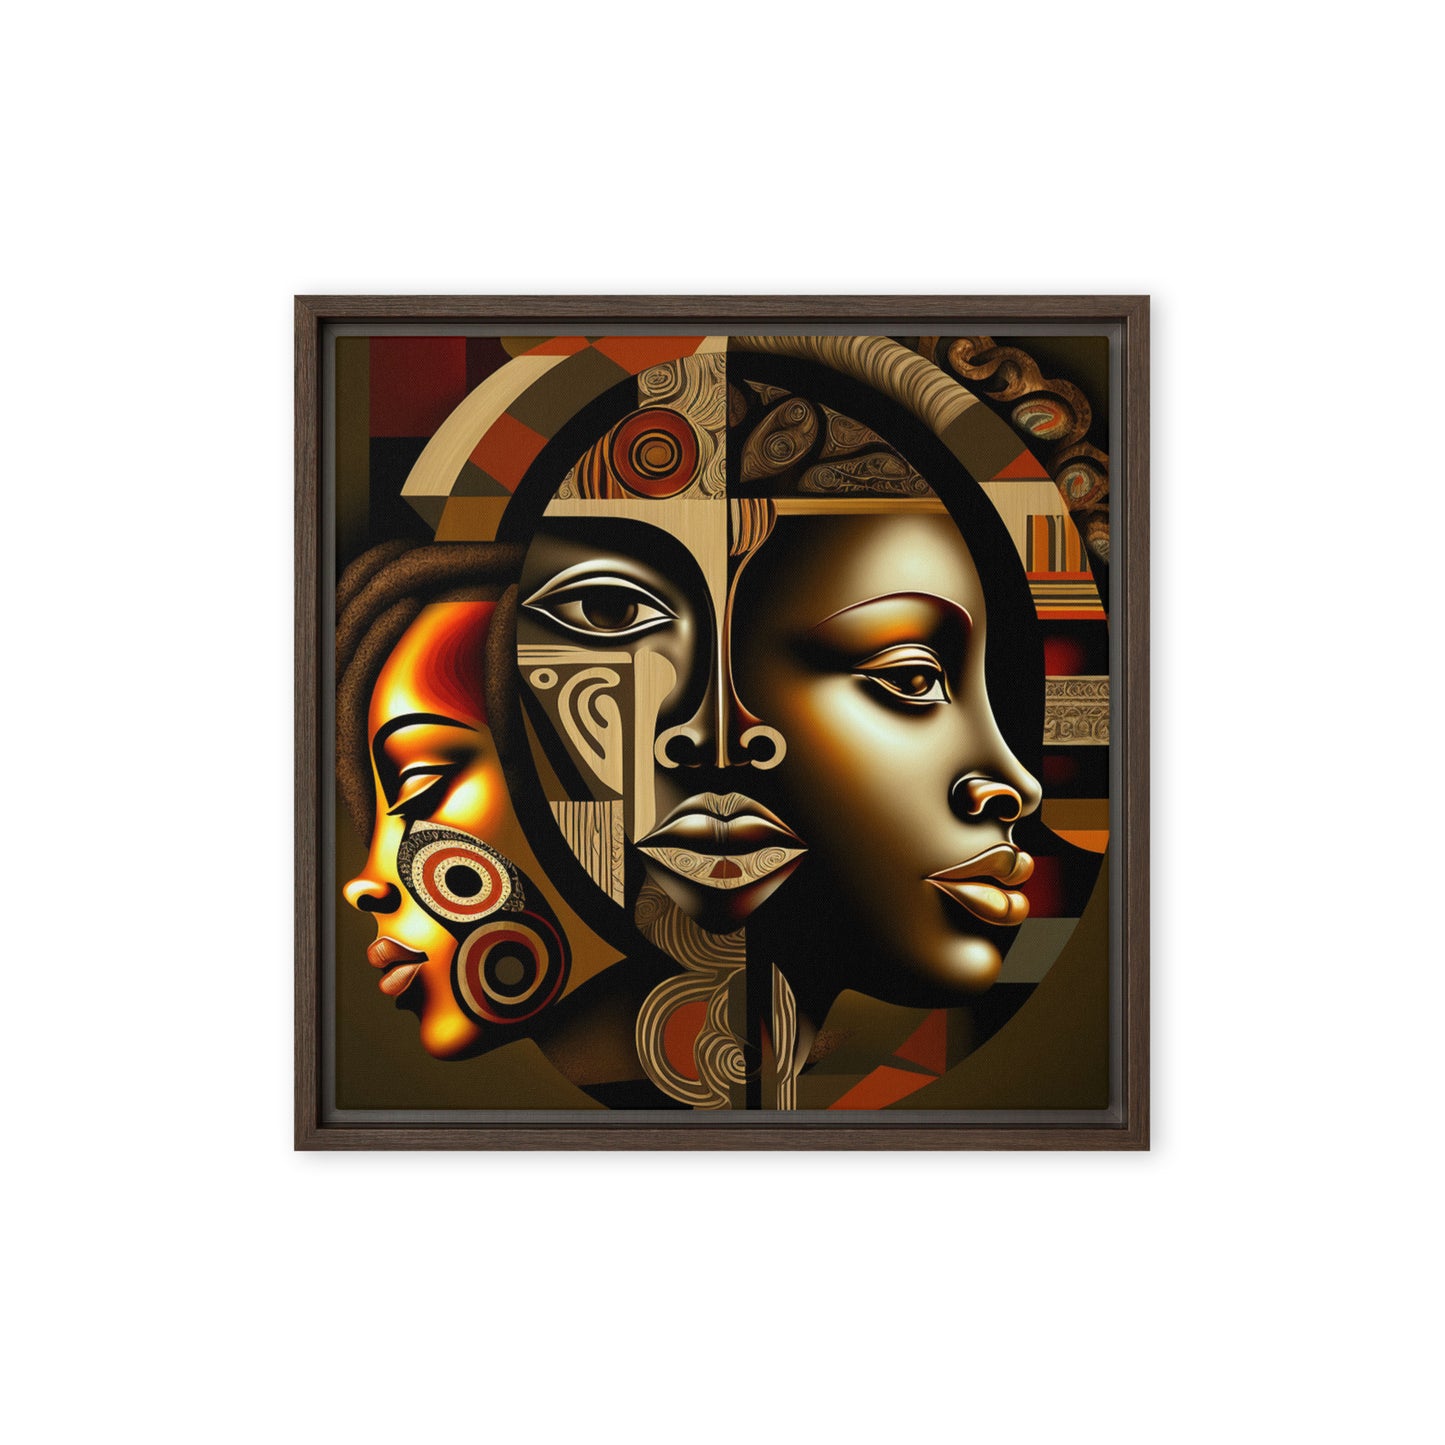 'ACCORD' abstract African design: Framed canvas art